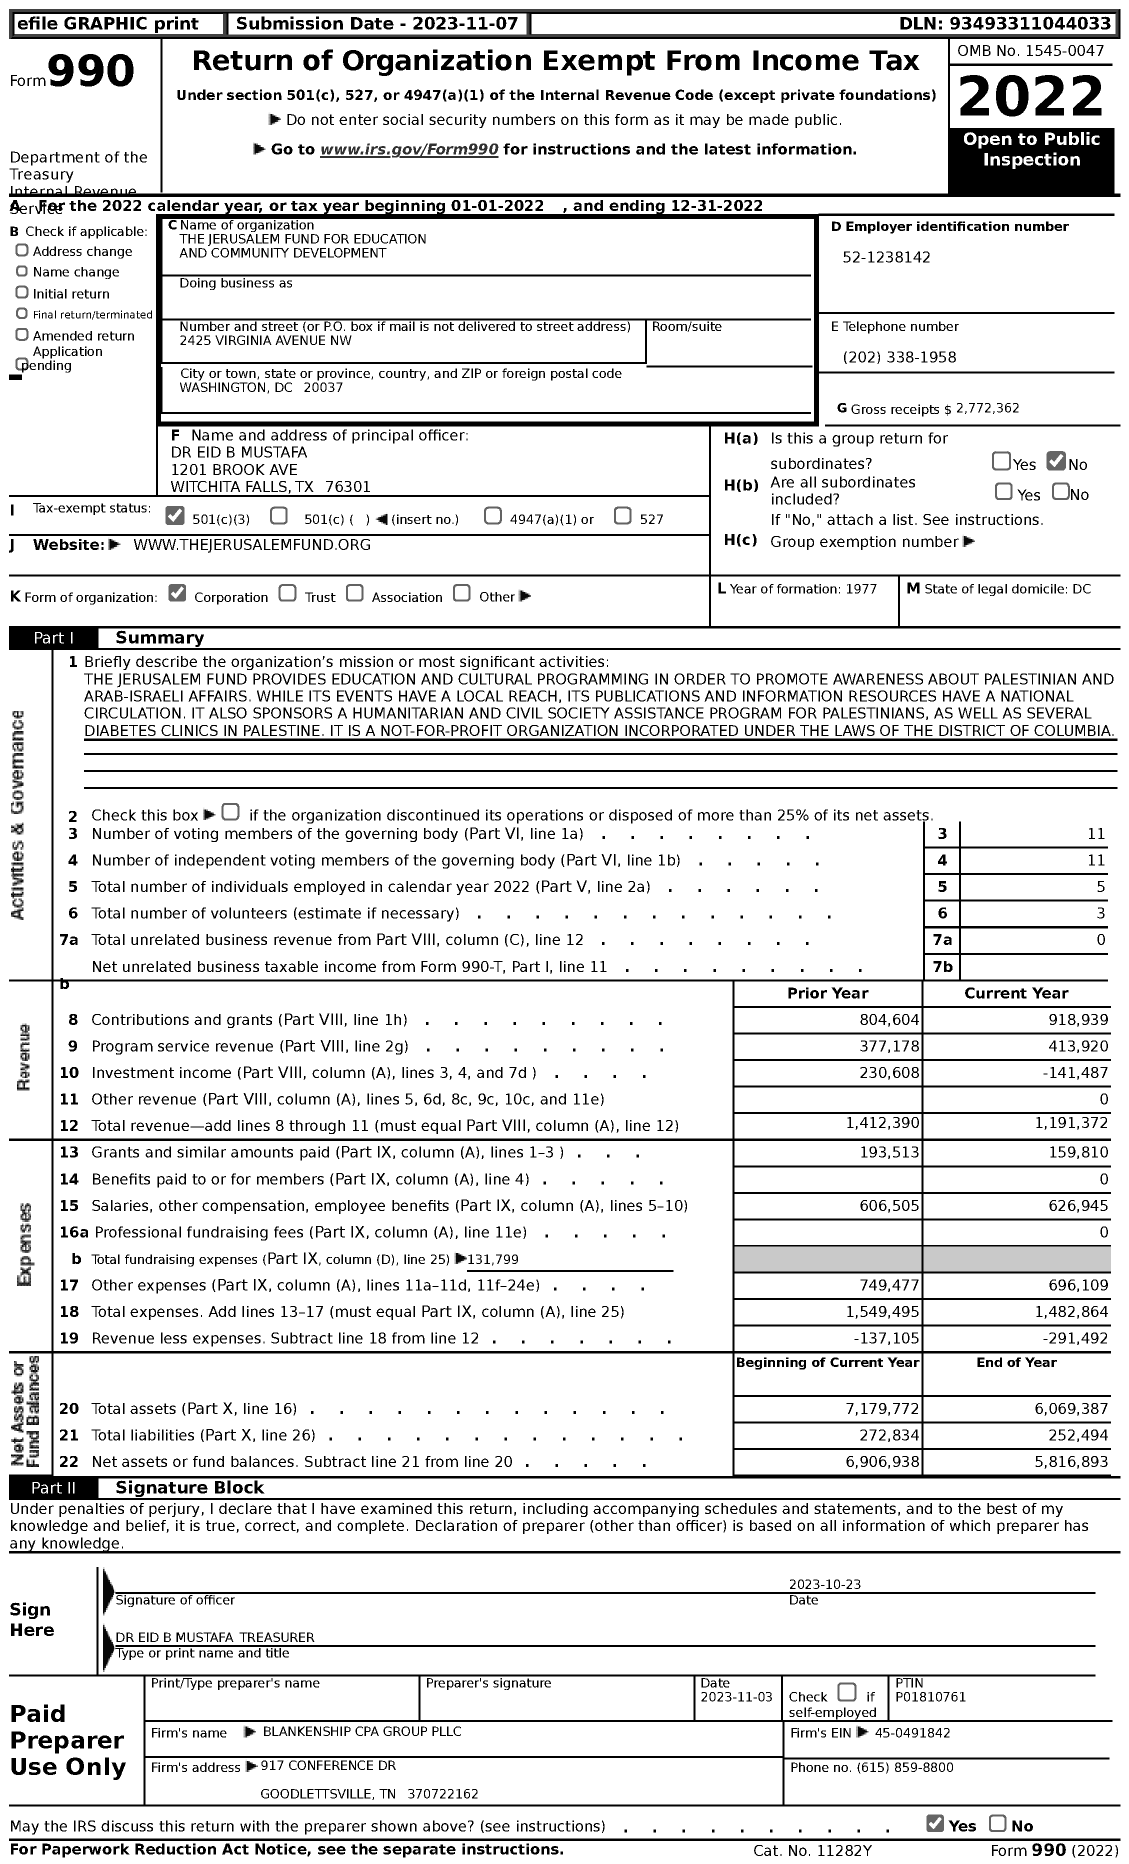 Image of first page of 2022 Form 990 for The Jerusalem Fund for Education and Community Development